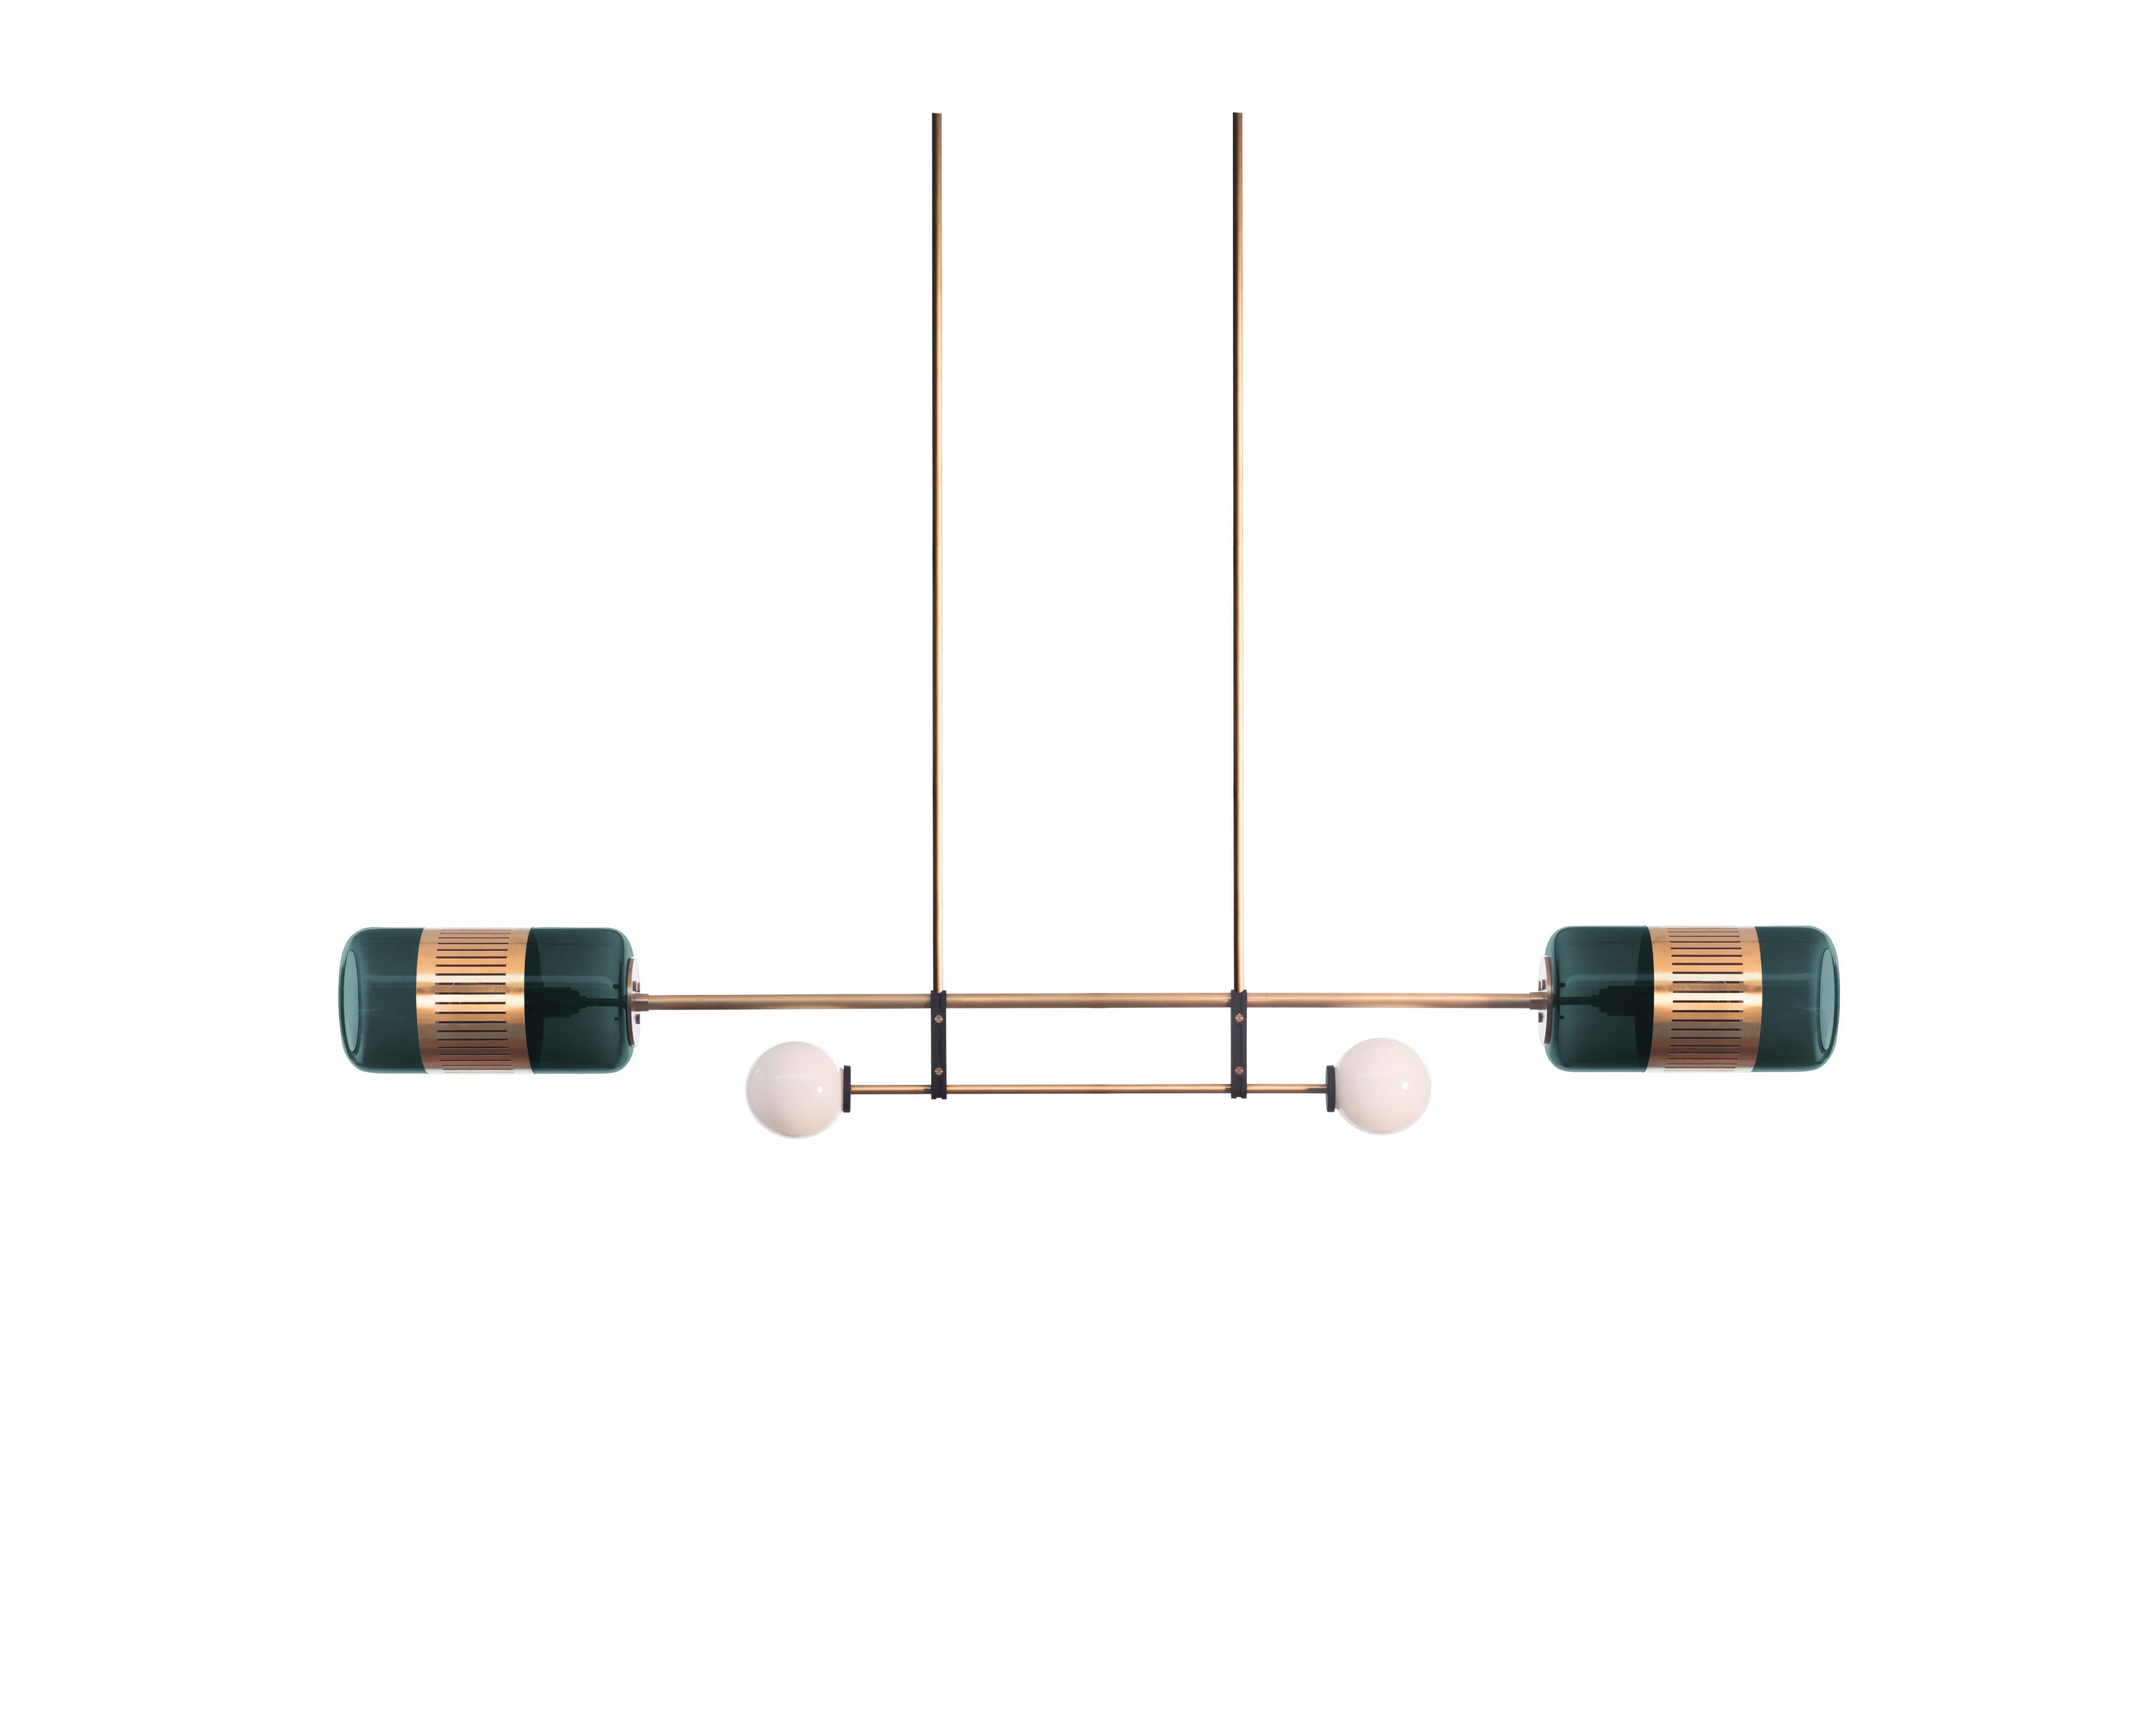 Blue Lizak pendant by Bert Frank
Dimensions: H 180 x W 180 x D 28 cm
Materials: Brass and glass

Available finishes: Brass, opal and blue
All our lamps can be wired according to each country. If sold to the USA it will be wired for the USA for